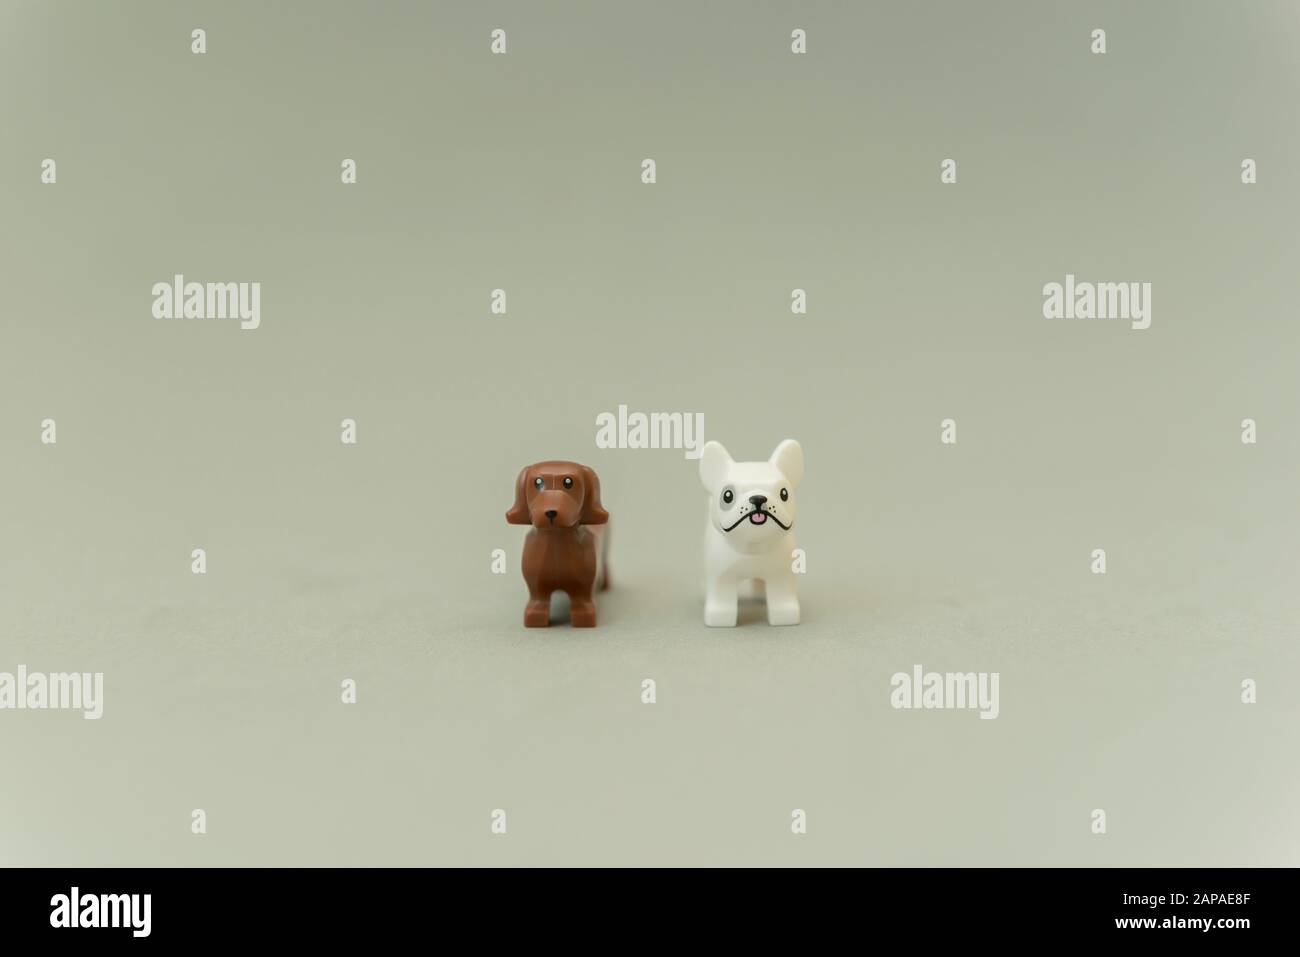 Florianopolis - Brazil, May 5, 2019: Two minifigures Lego - The dachshund  and pug side by side on a gray background. Studio shot. Selective focus.  Leg Stock Photo - Alamy